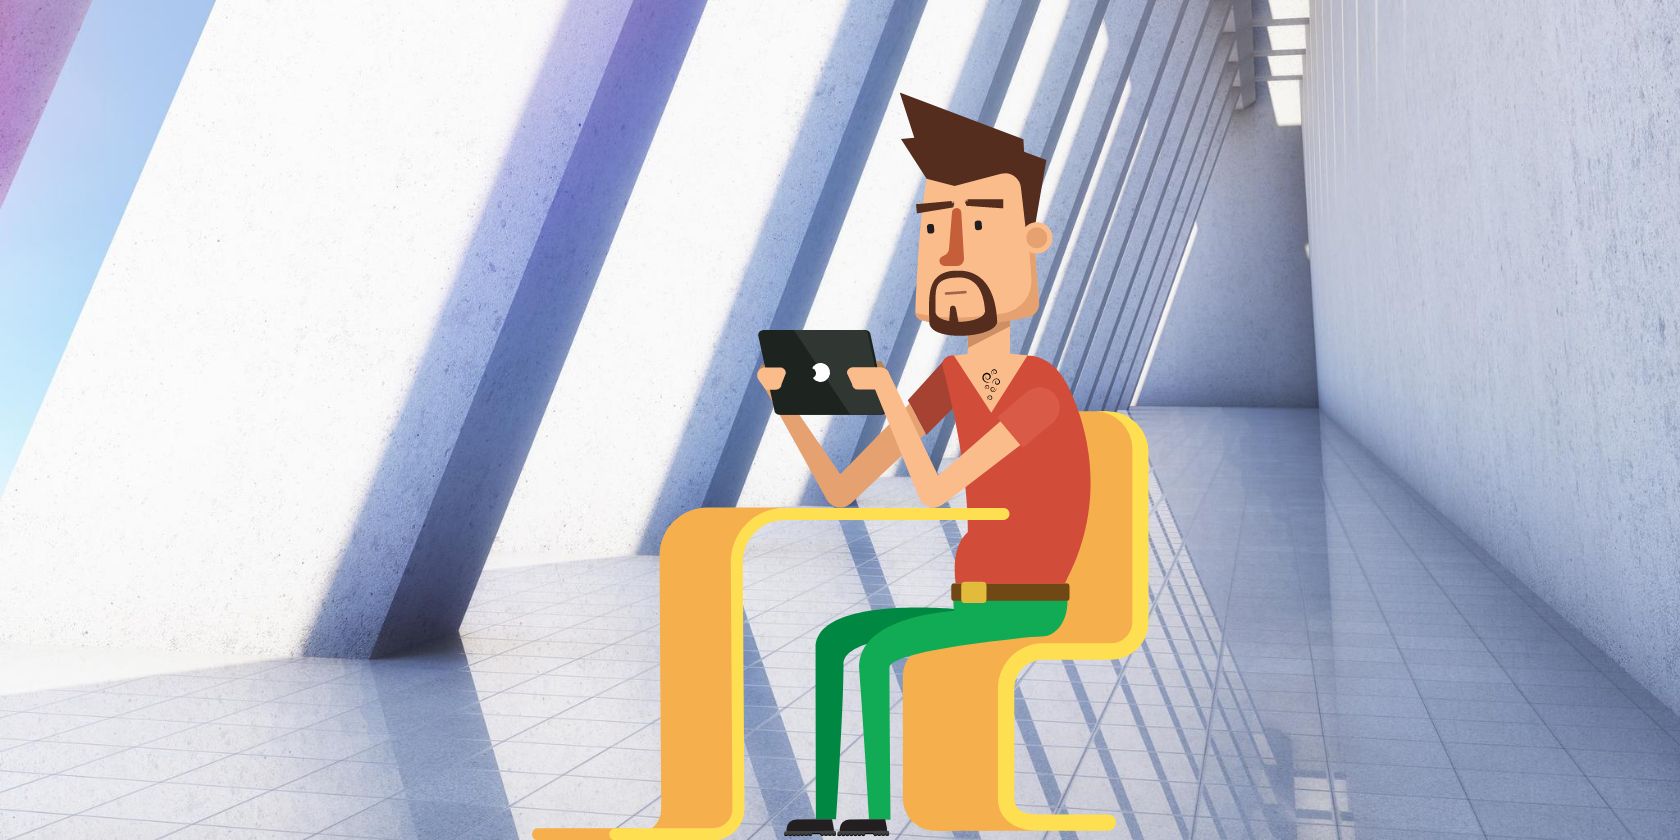 Illustration of a person working alone to avoid distractions